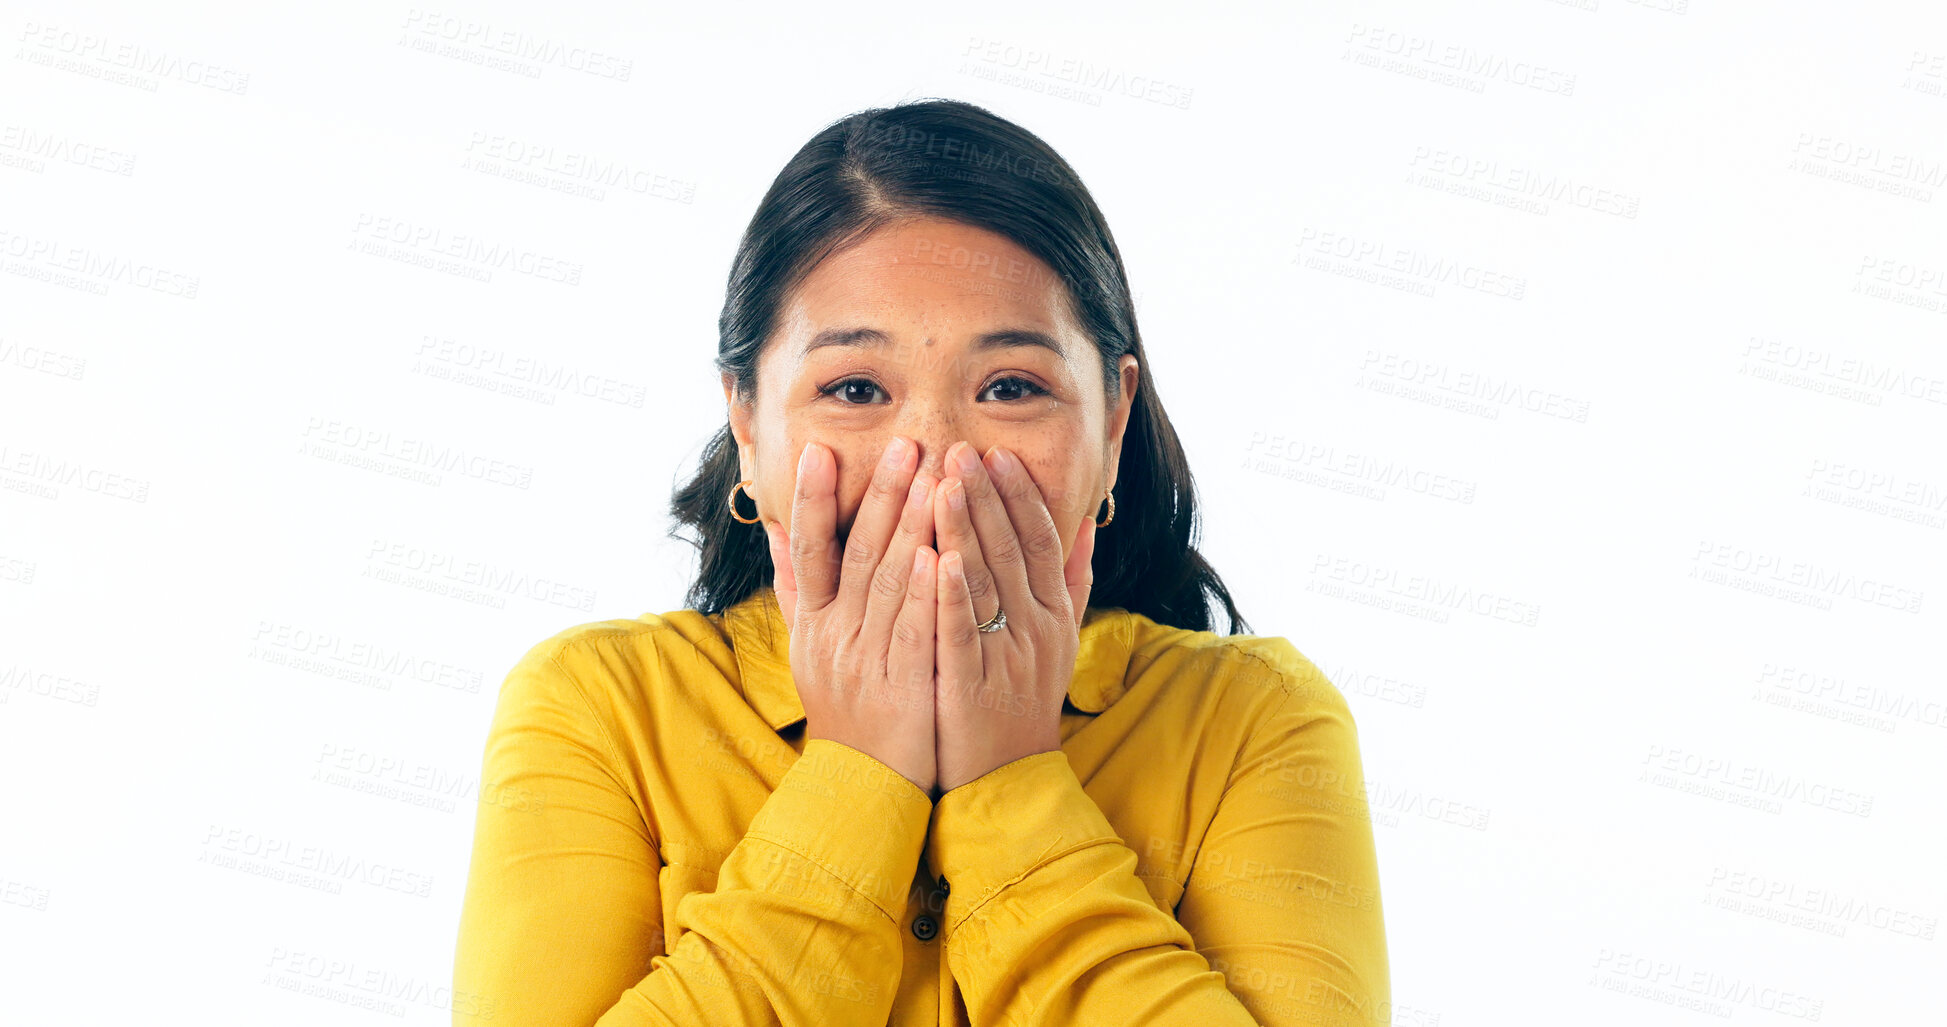 Buy stock photo Wow, news and hands on face of woman excited in studio for feedback, results or review on white background. Omg, portrait and winner with surprise emoji for announcement, lottery or competition prize